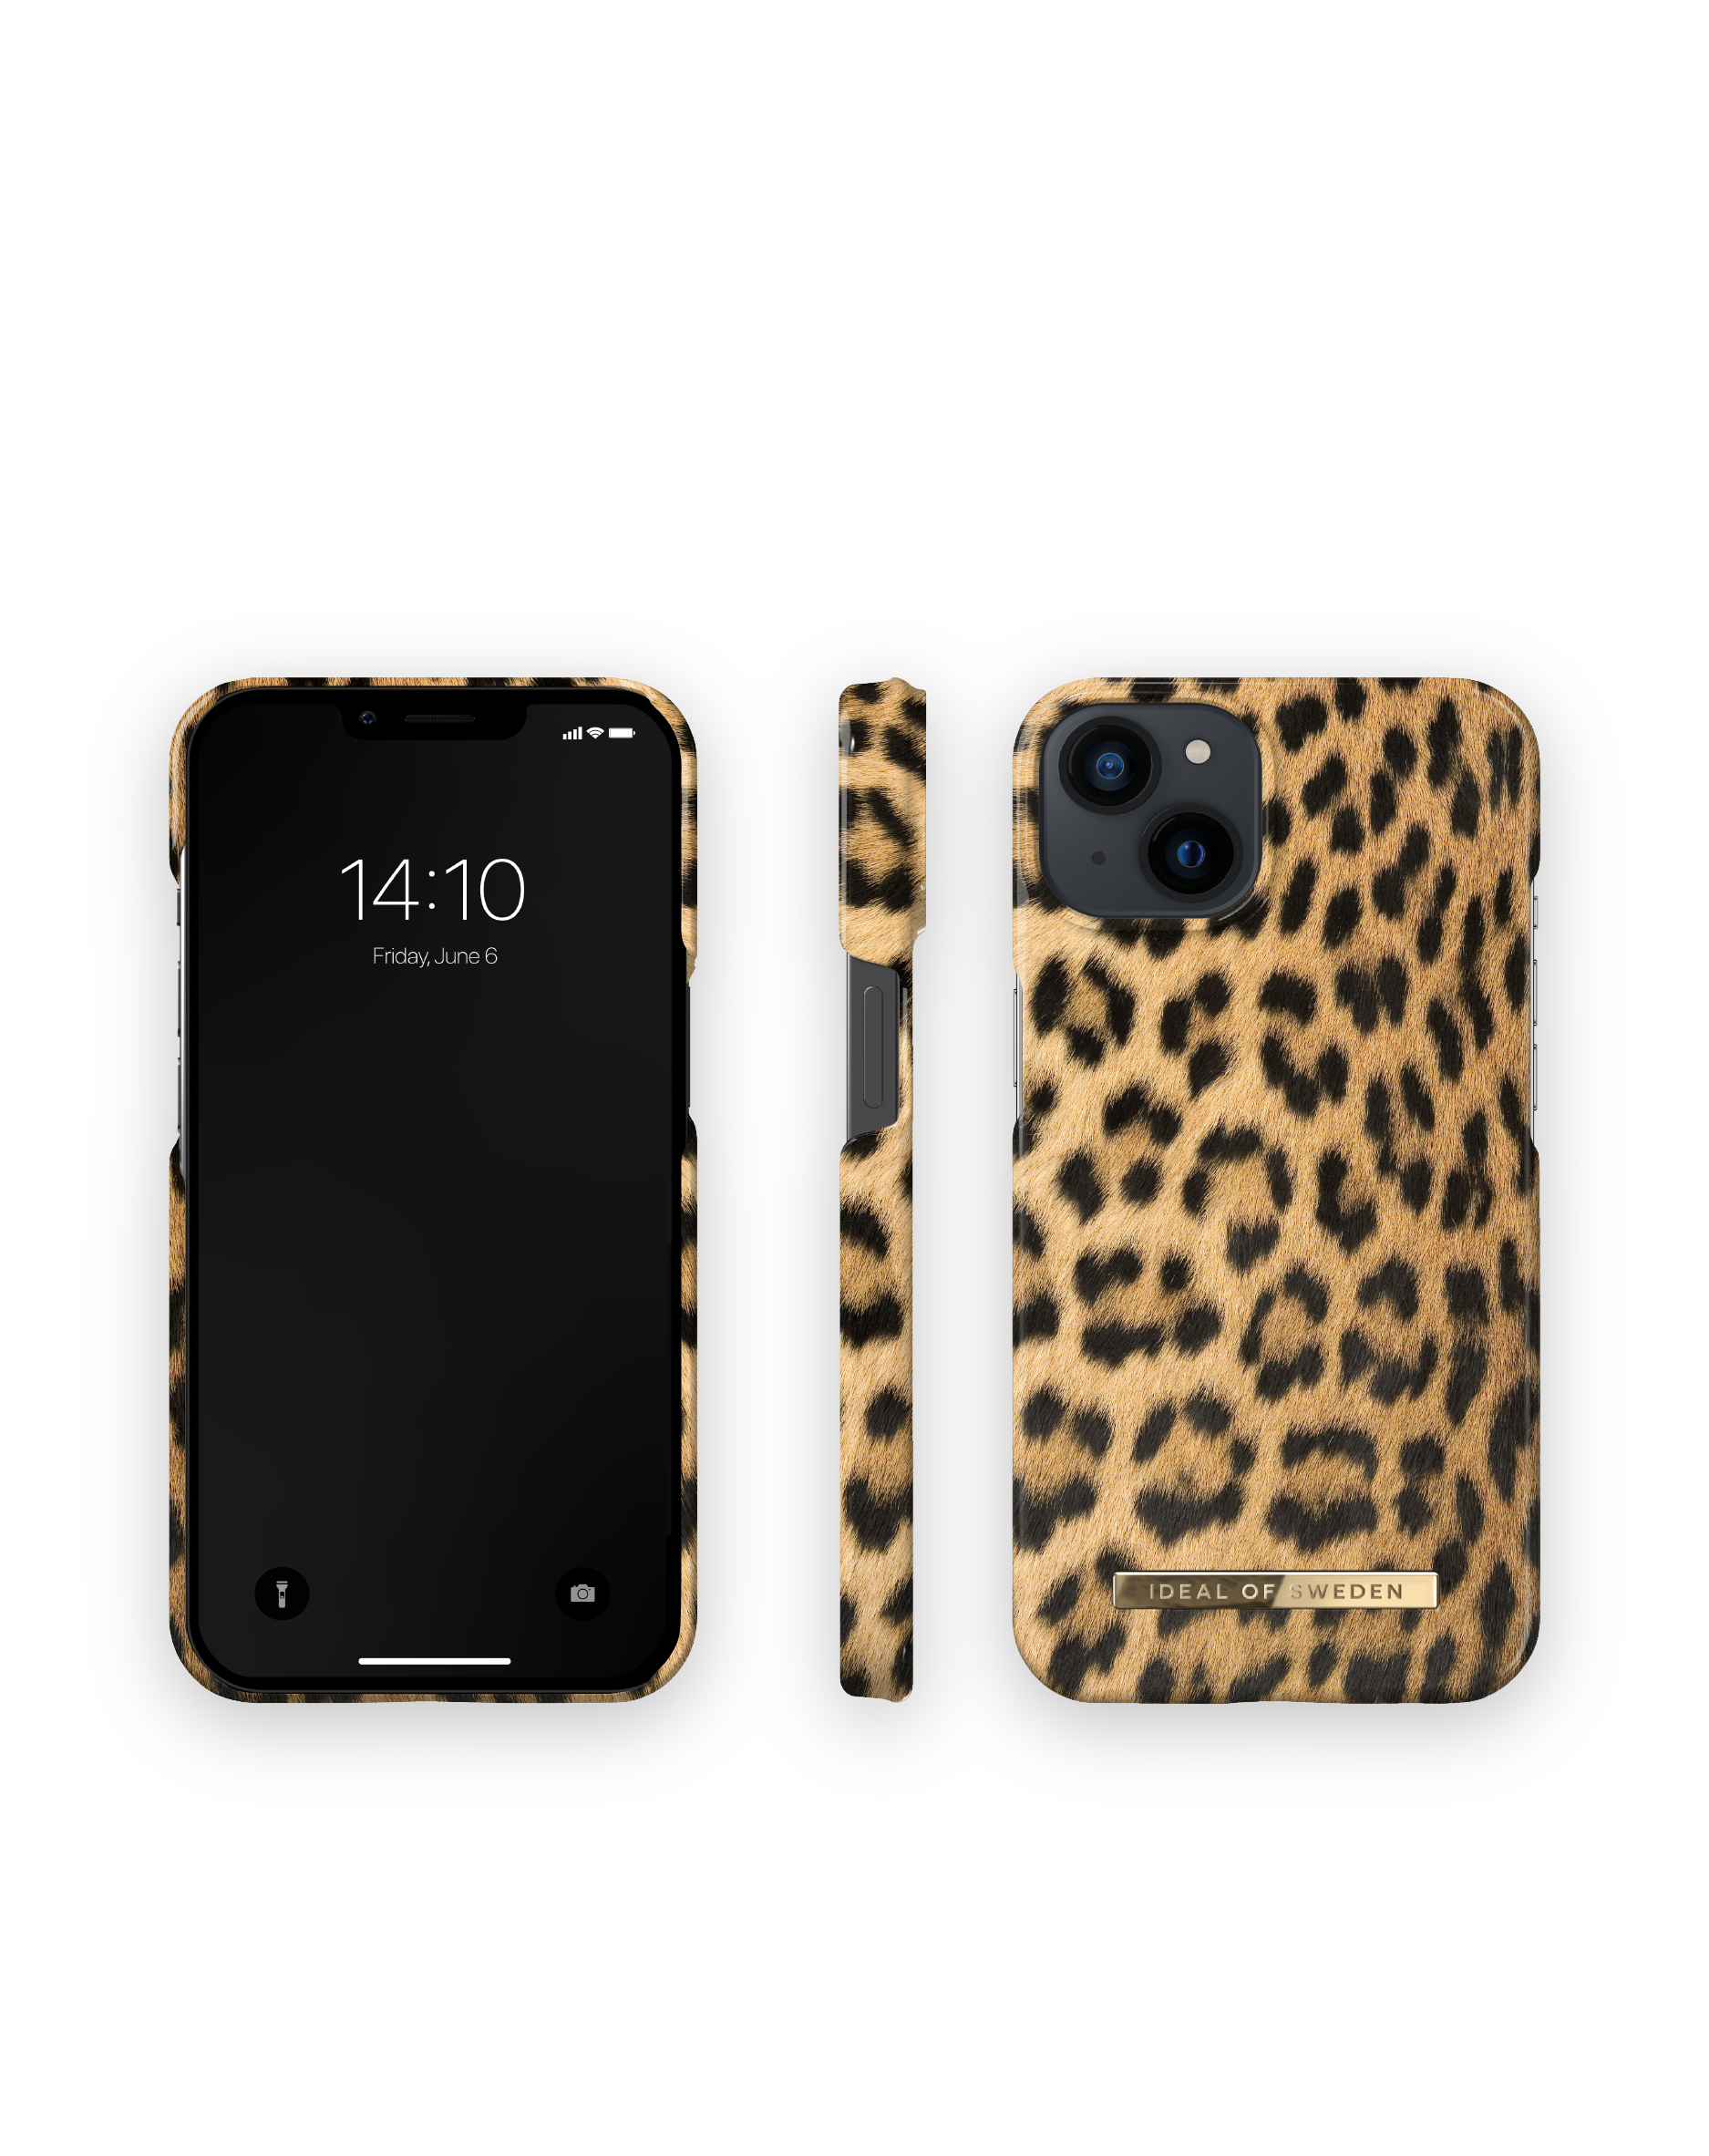 Leopard Backcover, IDEAL IDFCS17-I2154-67, Wild iPhone Mini, SWEDEN OF 13 Apple,